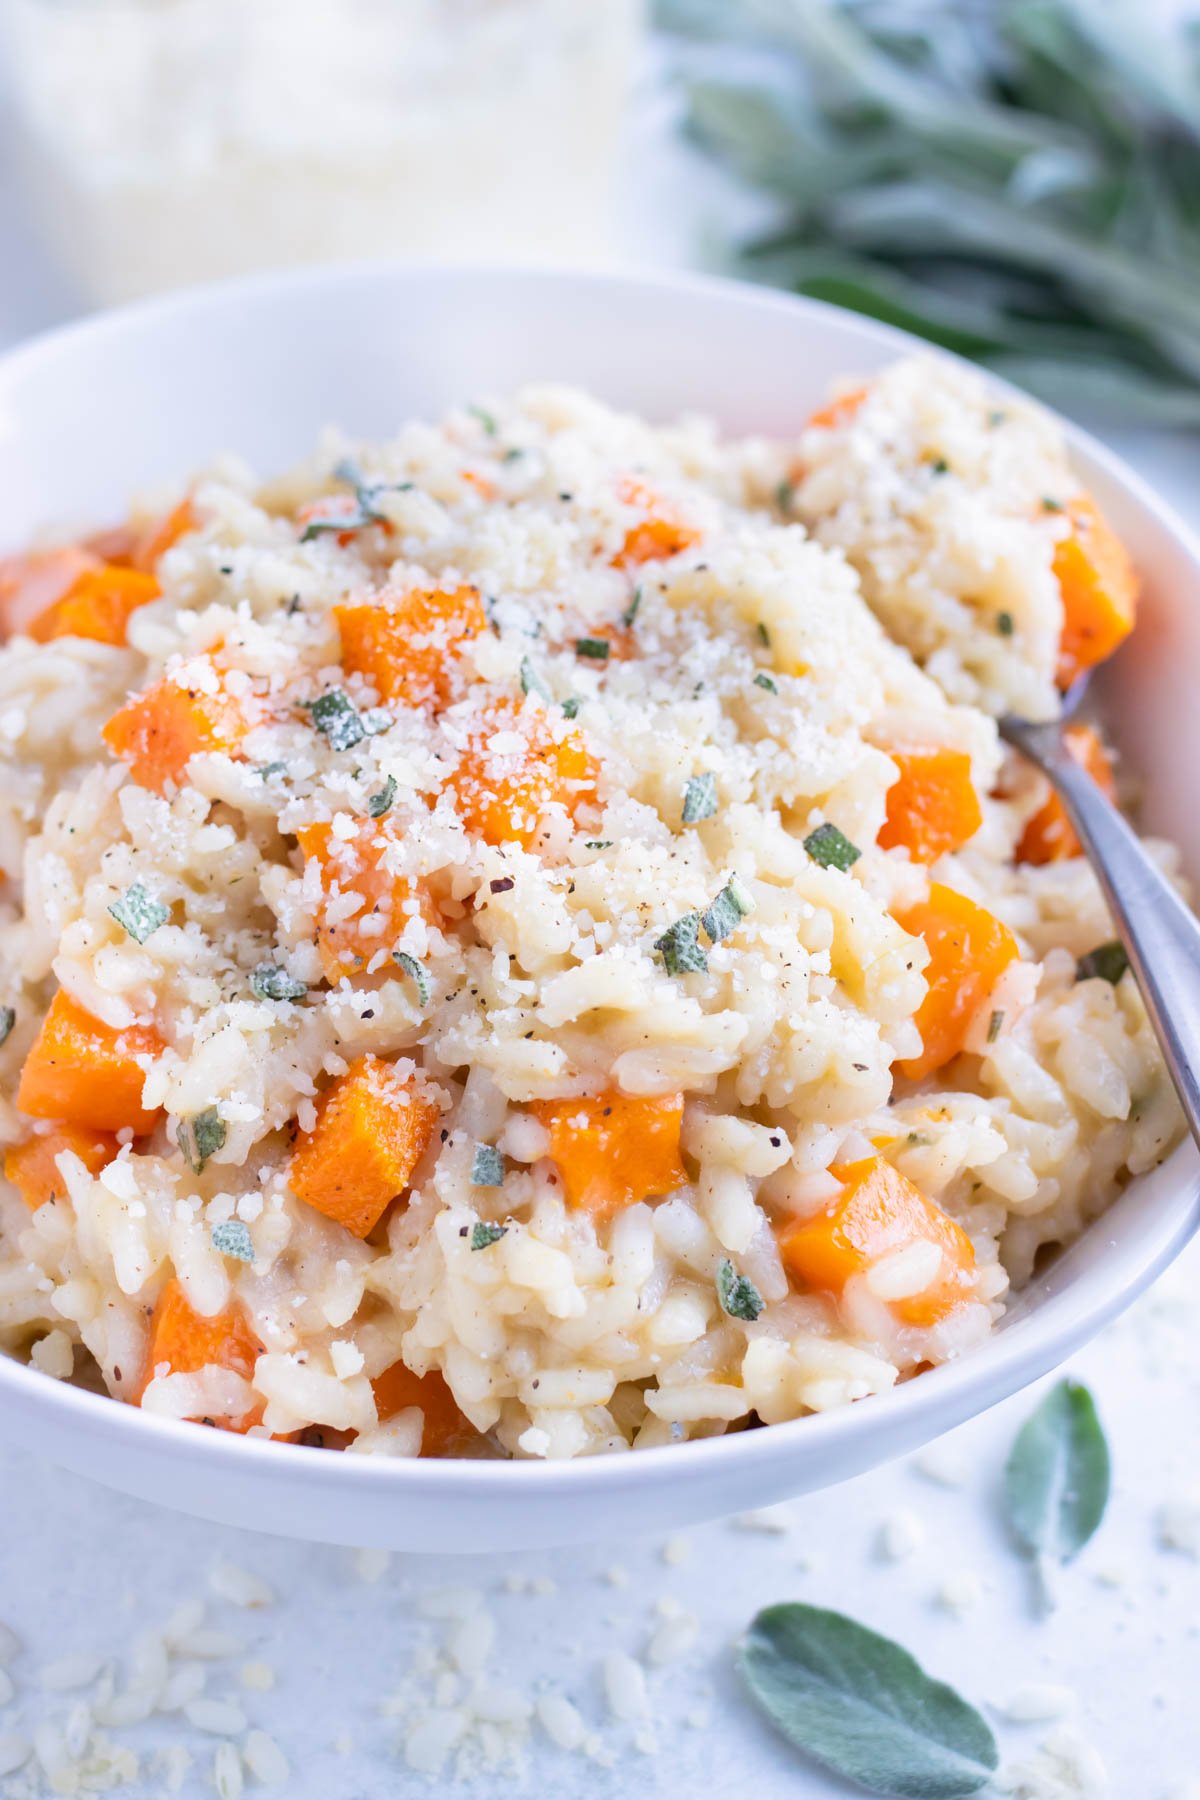 Butternut squash risotto is enjoyed with a spoon for dinner.